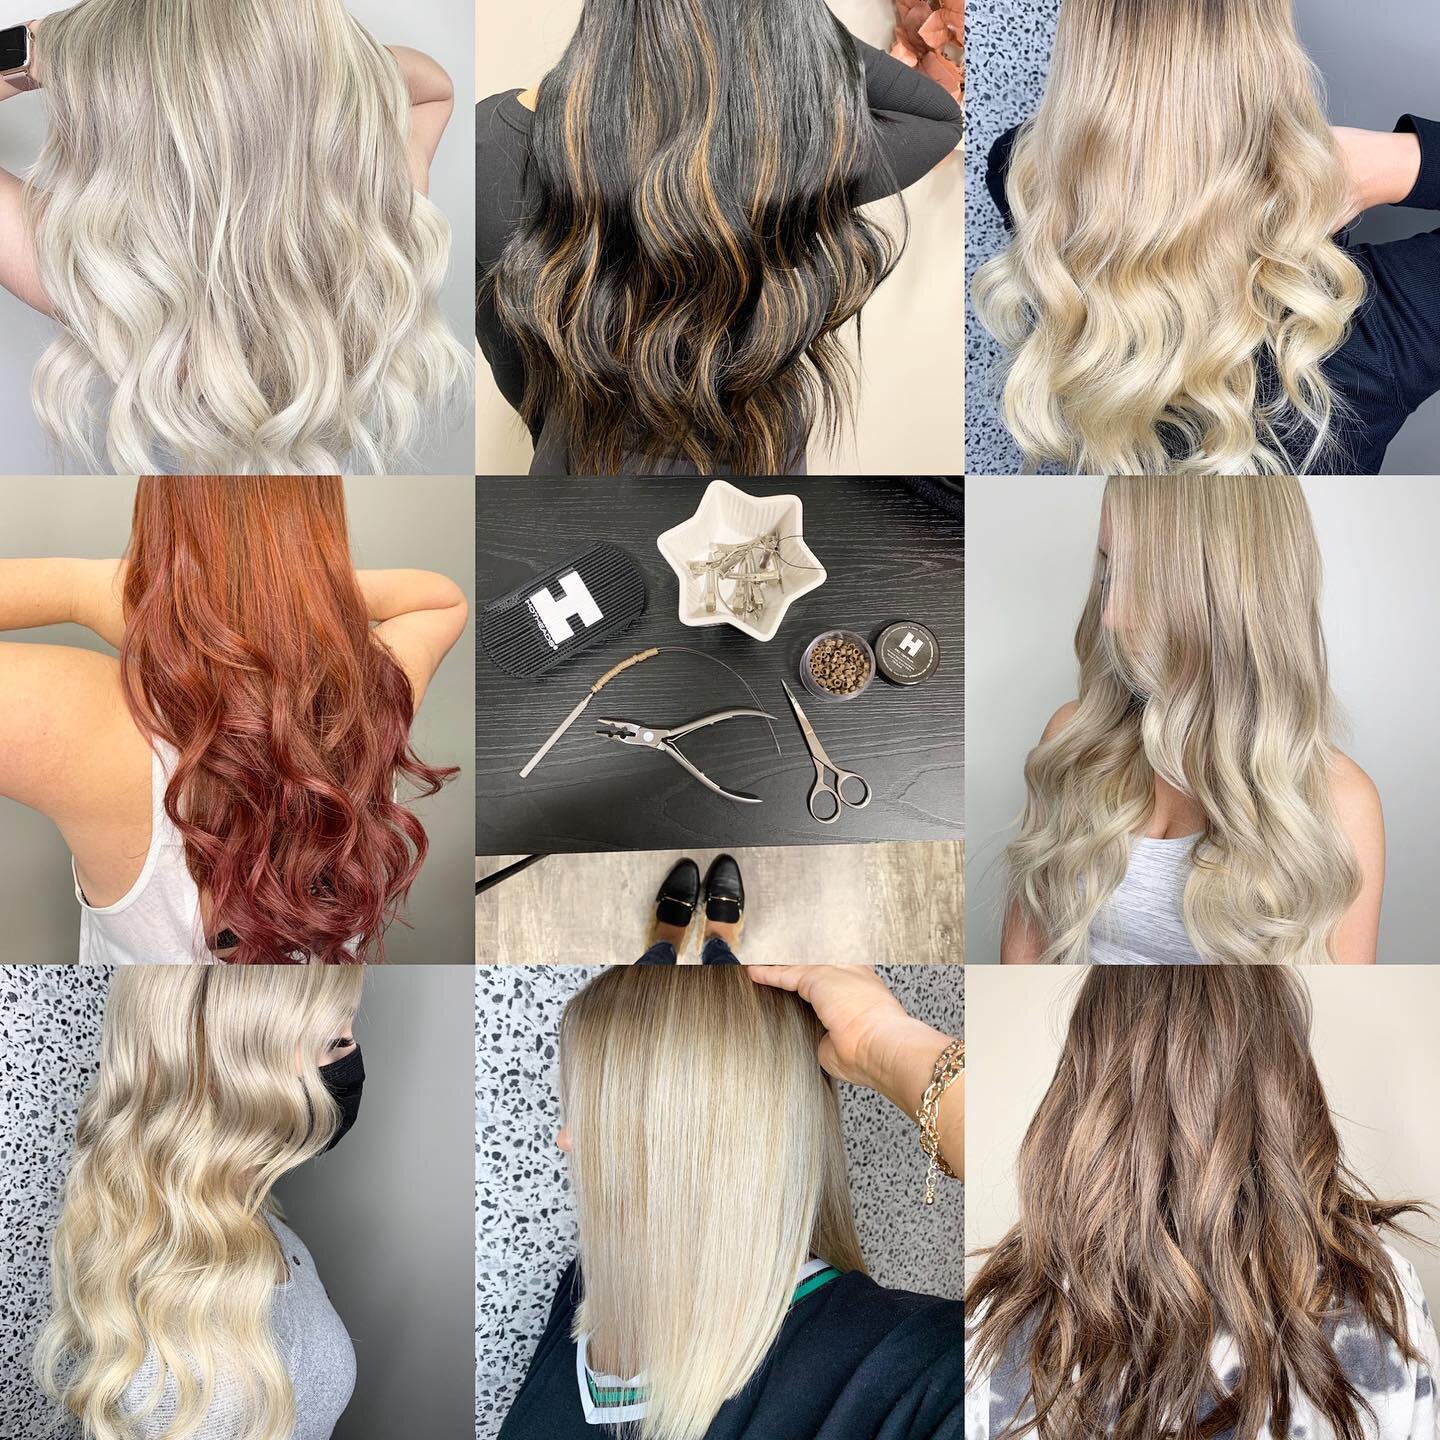 Hair inspo anyone?! Which one speaks to you?✨